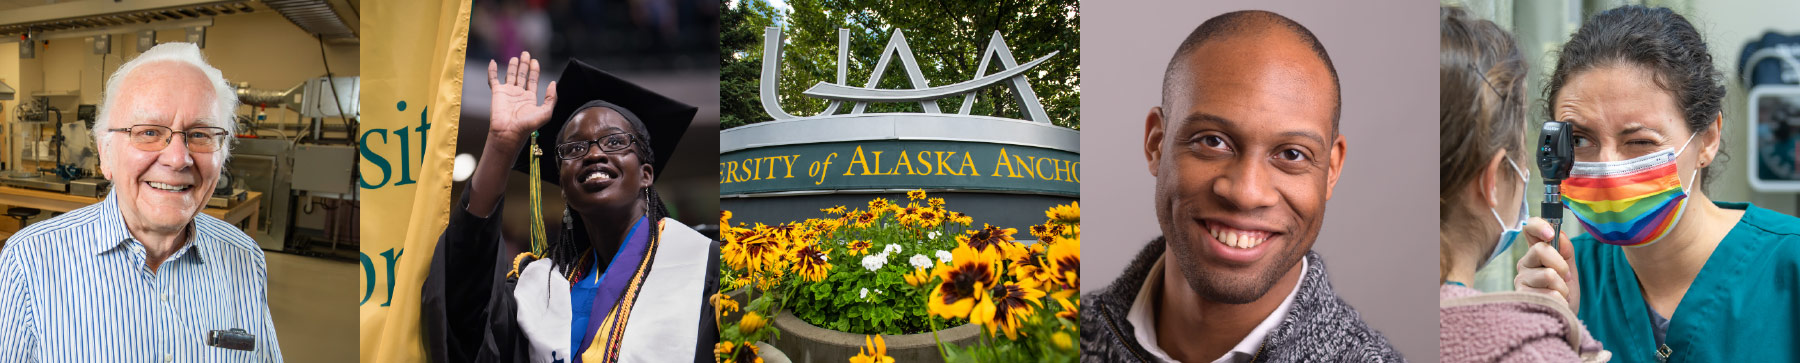 Collage of images from the University of Alaska Anchorage